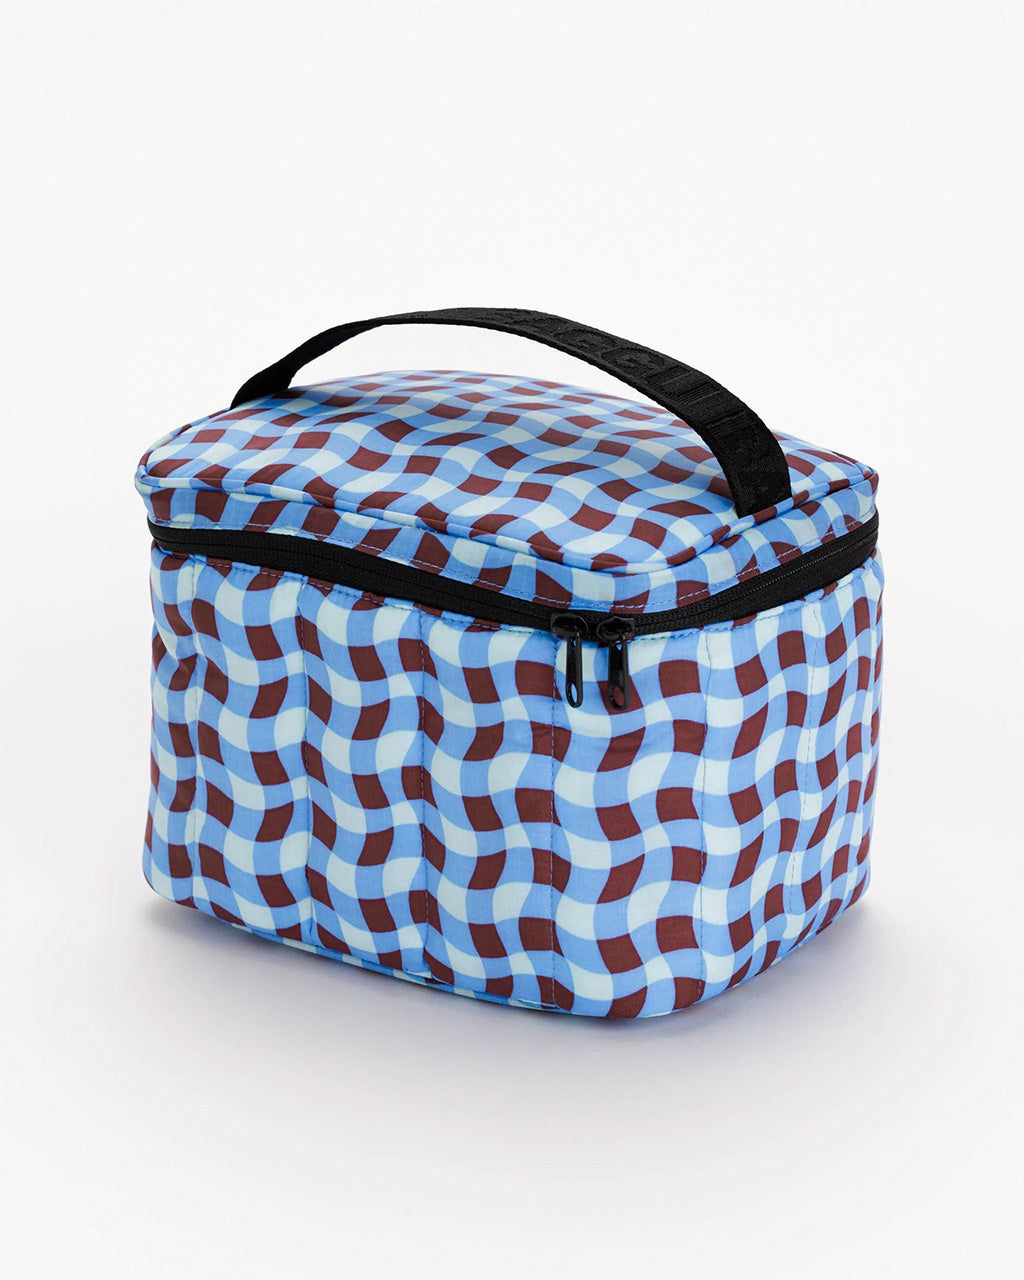 Tote Lunchbag On the go Blue